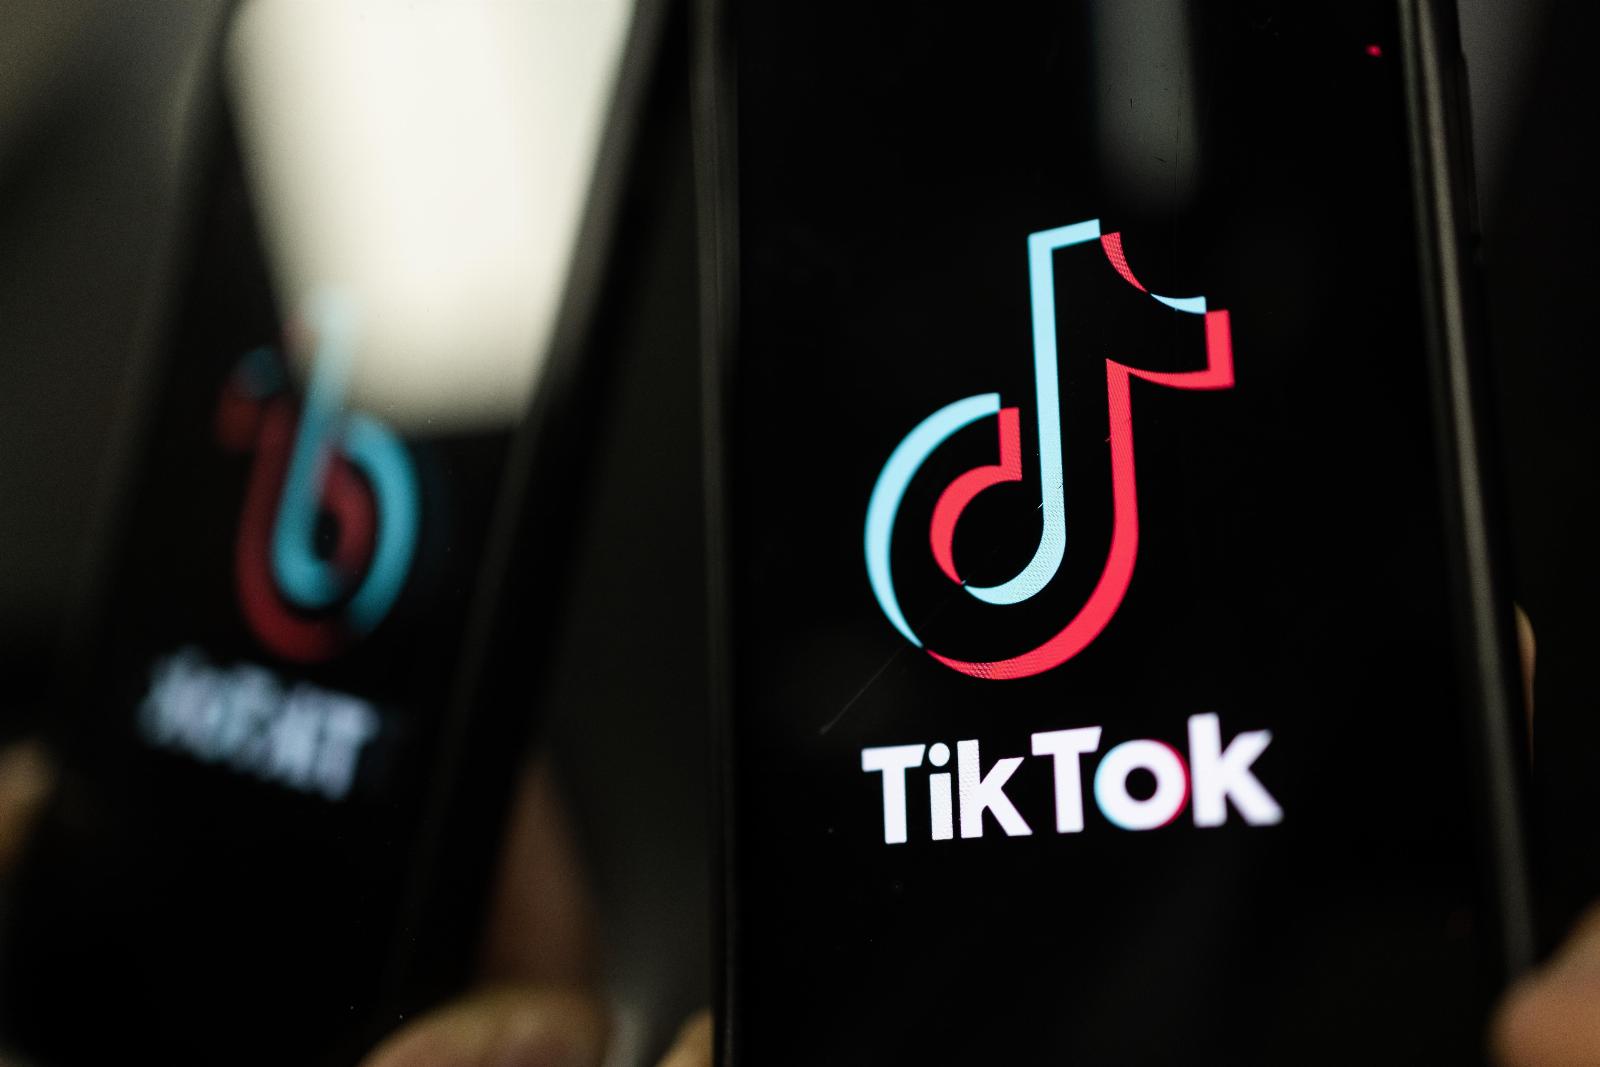 A 20-Year-Old Local in Montana Explains Exactly How He Feels About the State’s TikTok Ban